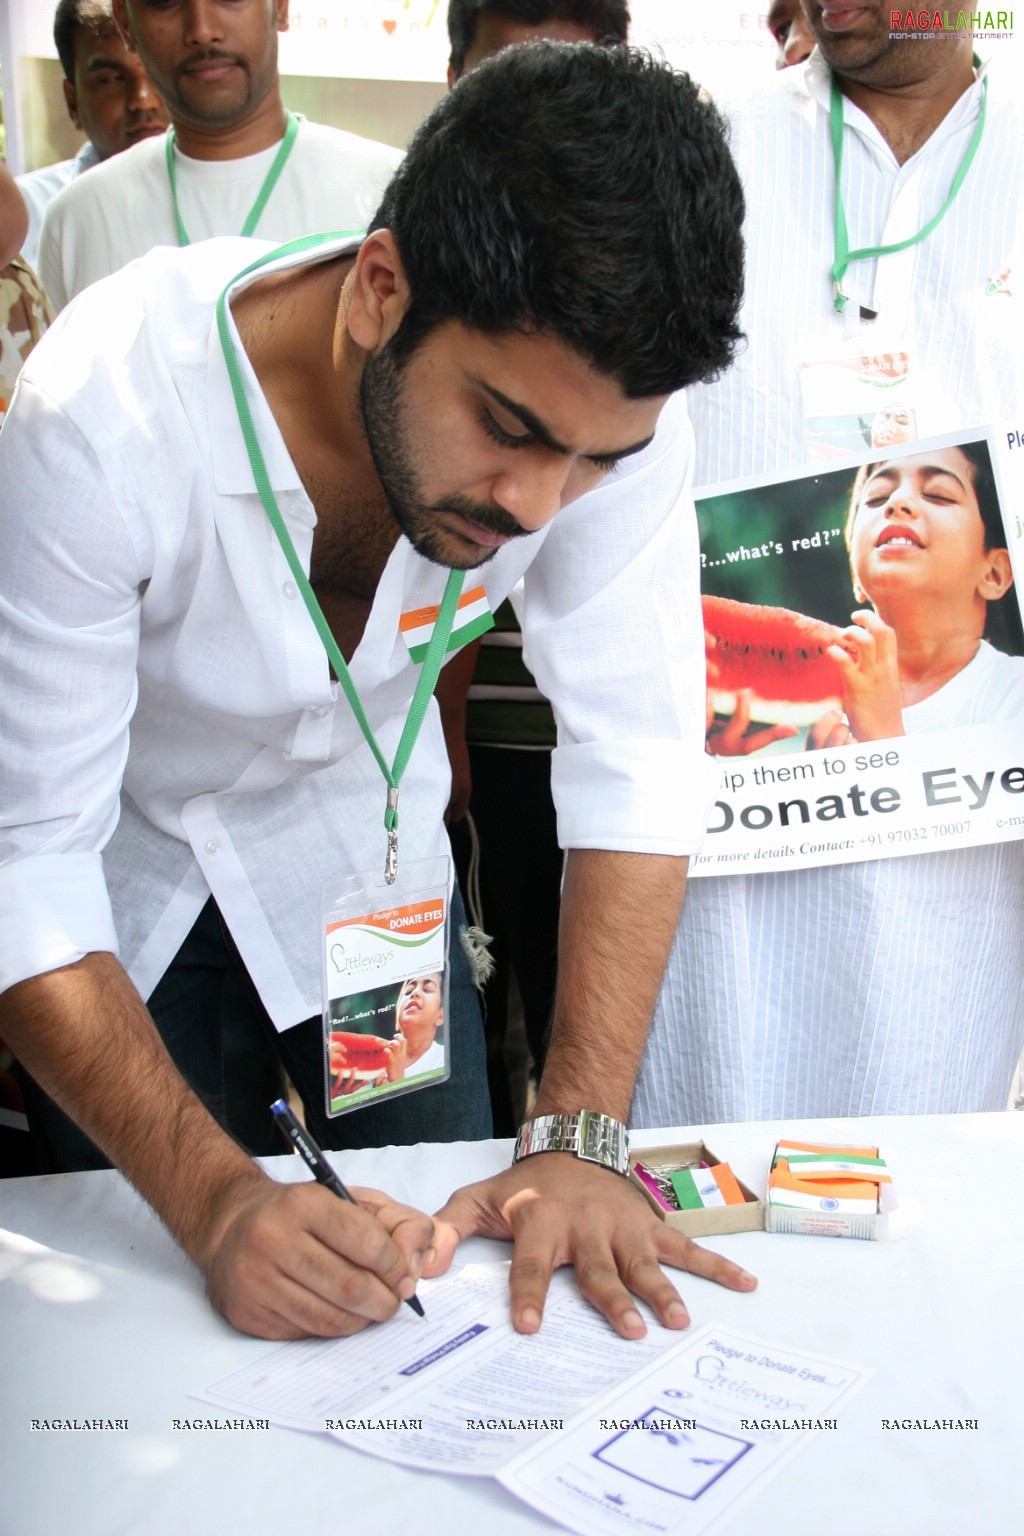 Pledge to Donate Eyes by 'Littleways Foundation'